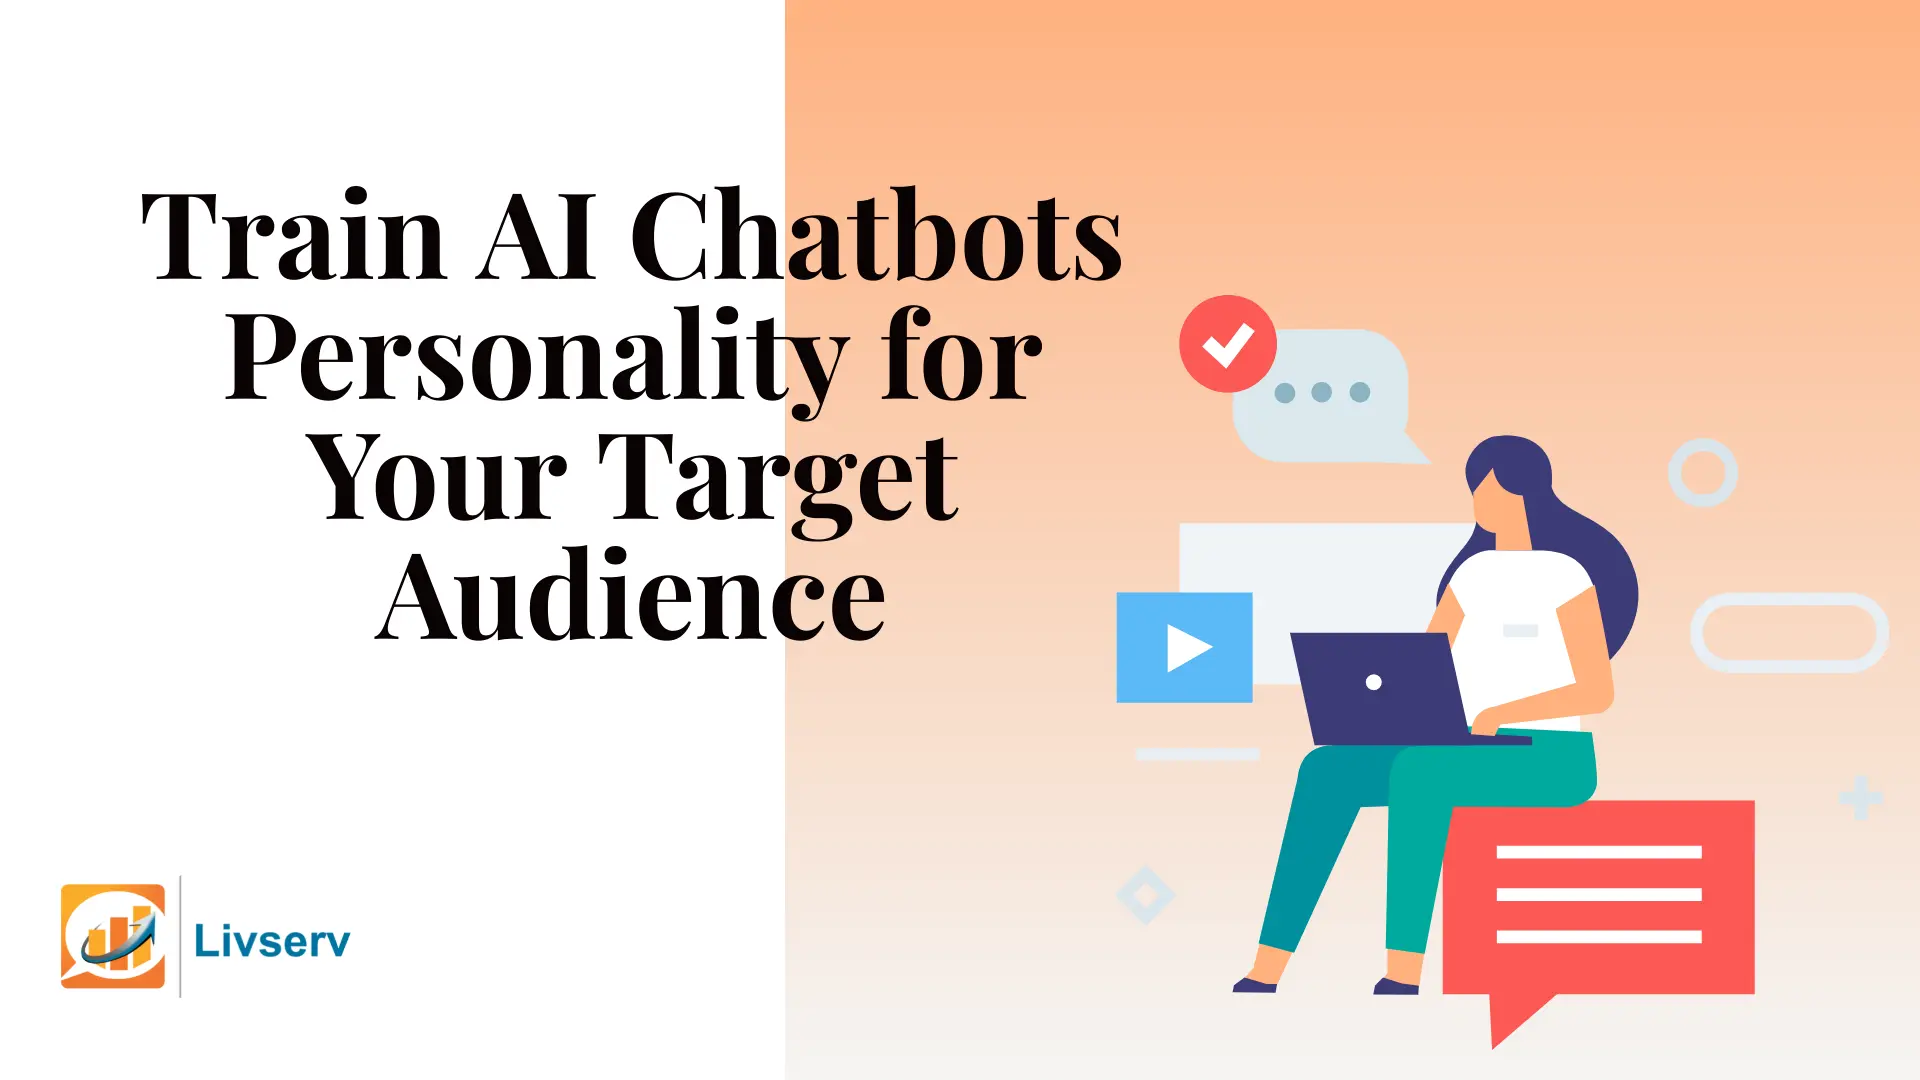 How To Train AI Chatbots Personality To Maximize Engagement